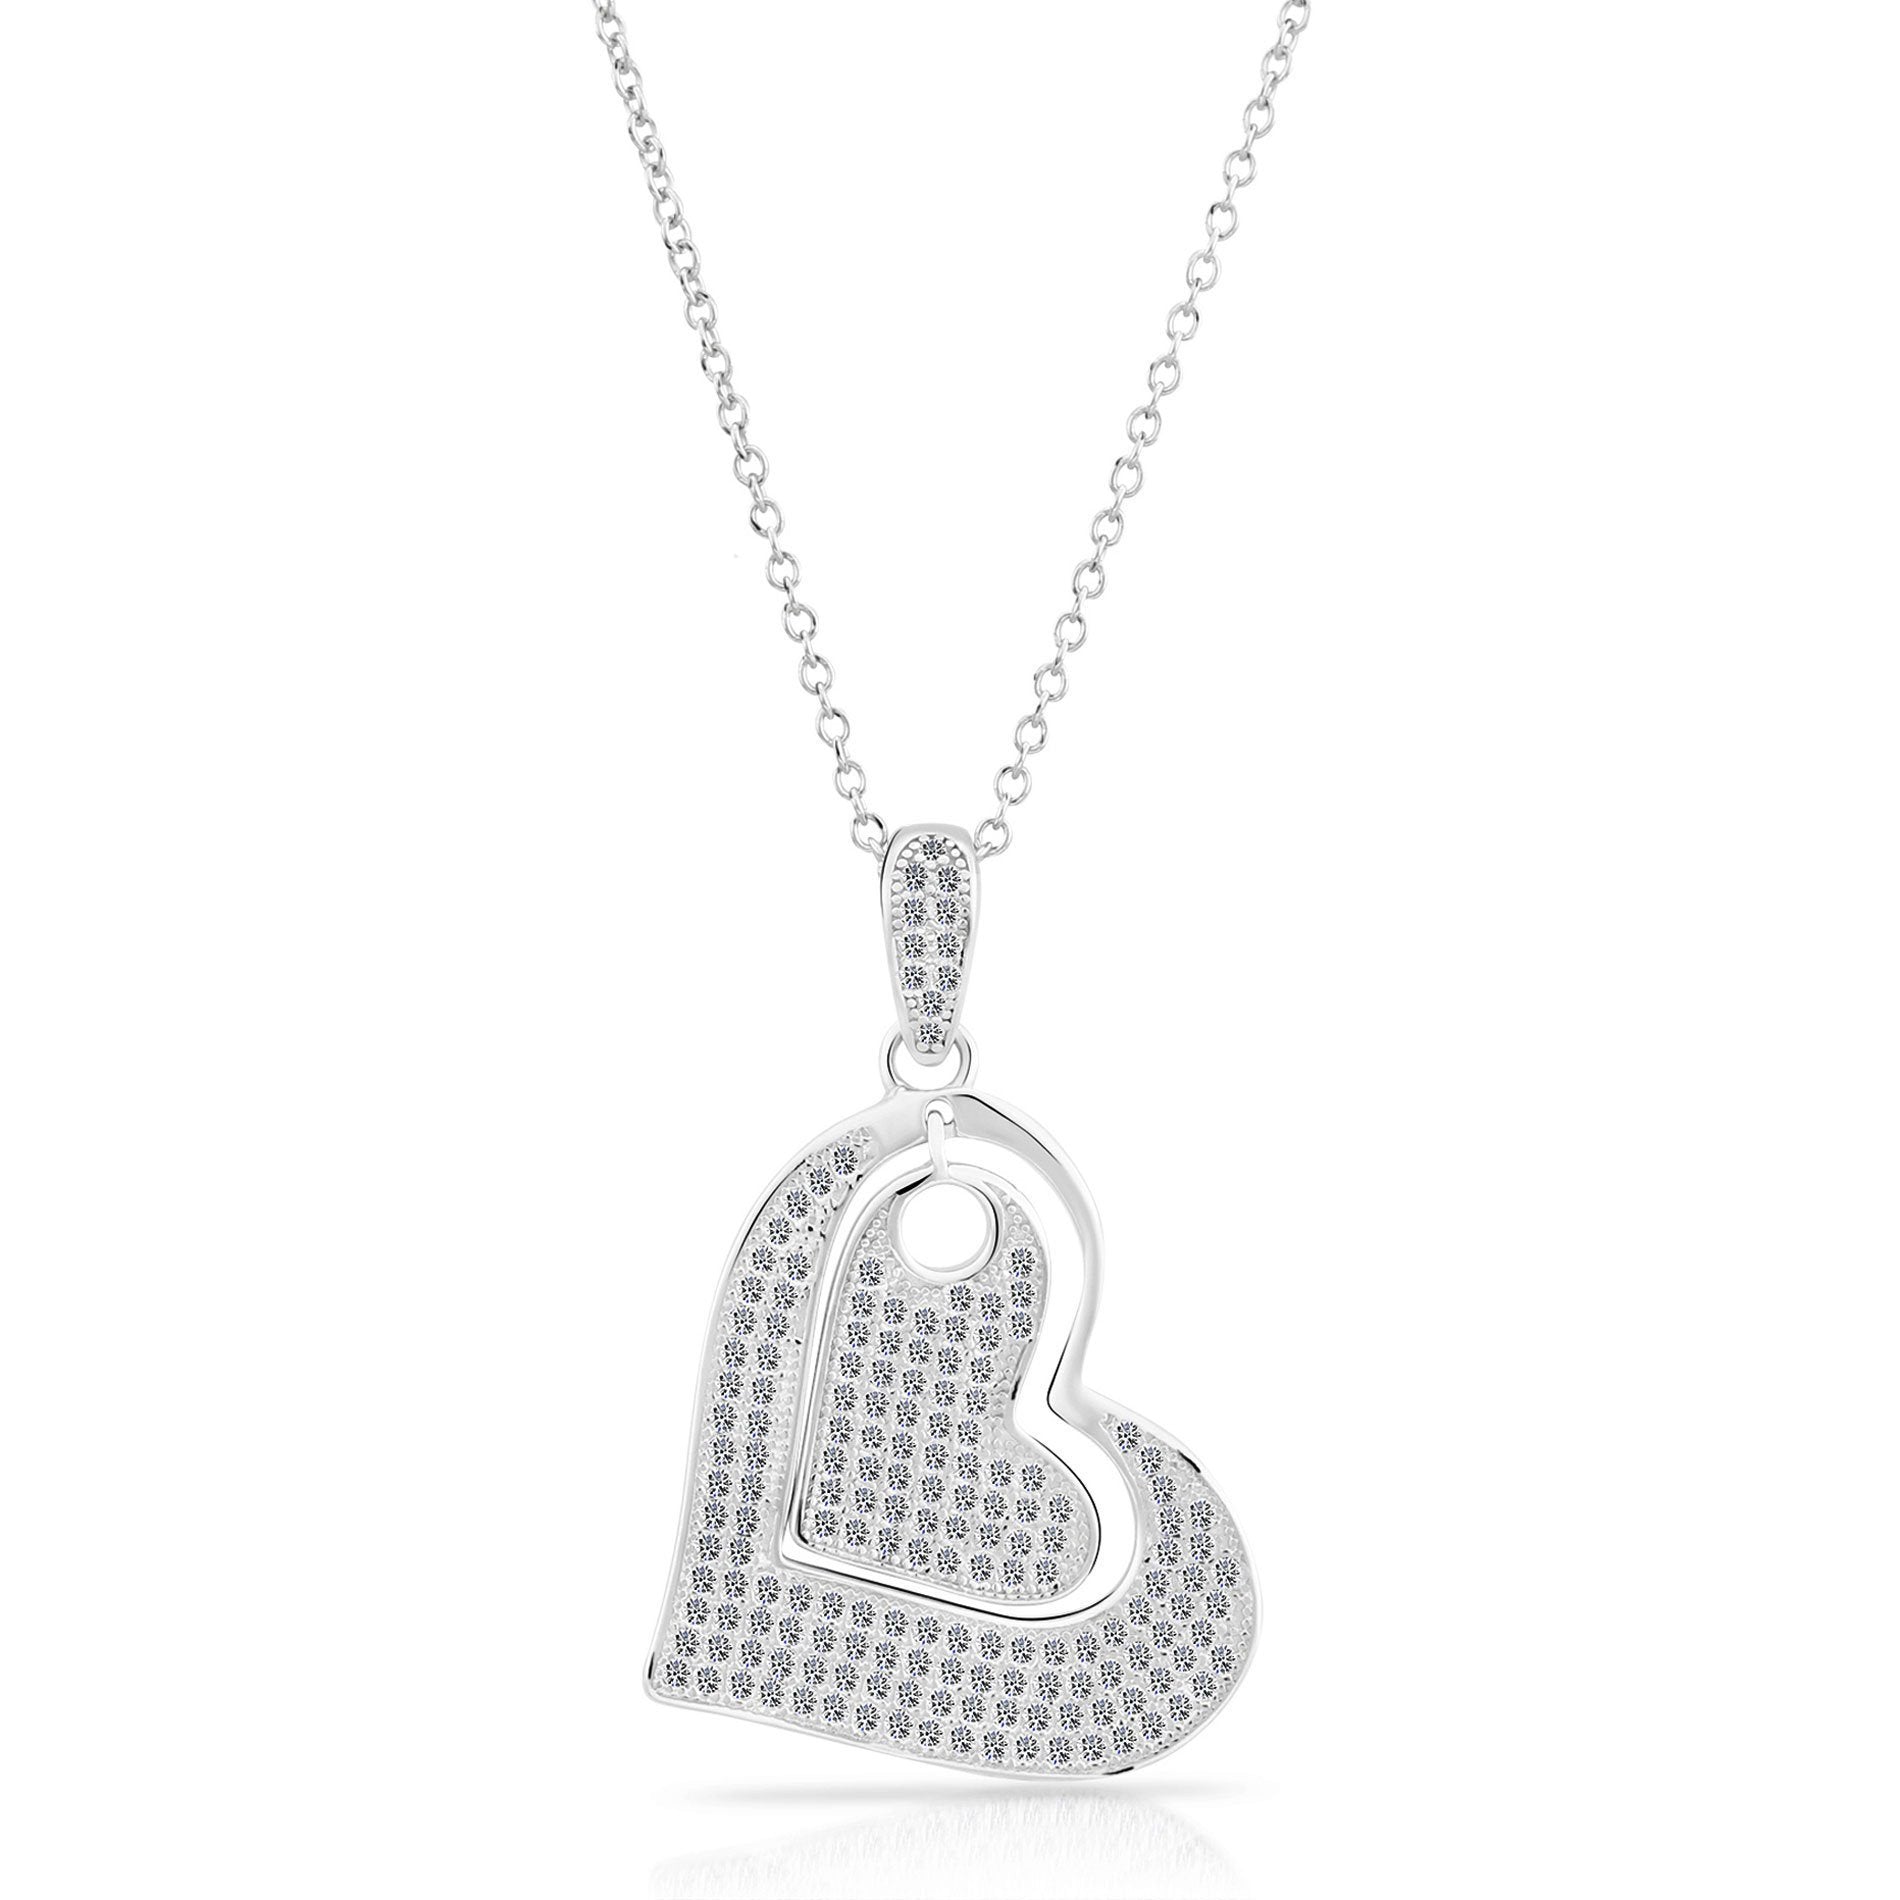 CZ Double Dangling Heart Charm Necklace in Sterling Silver